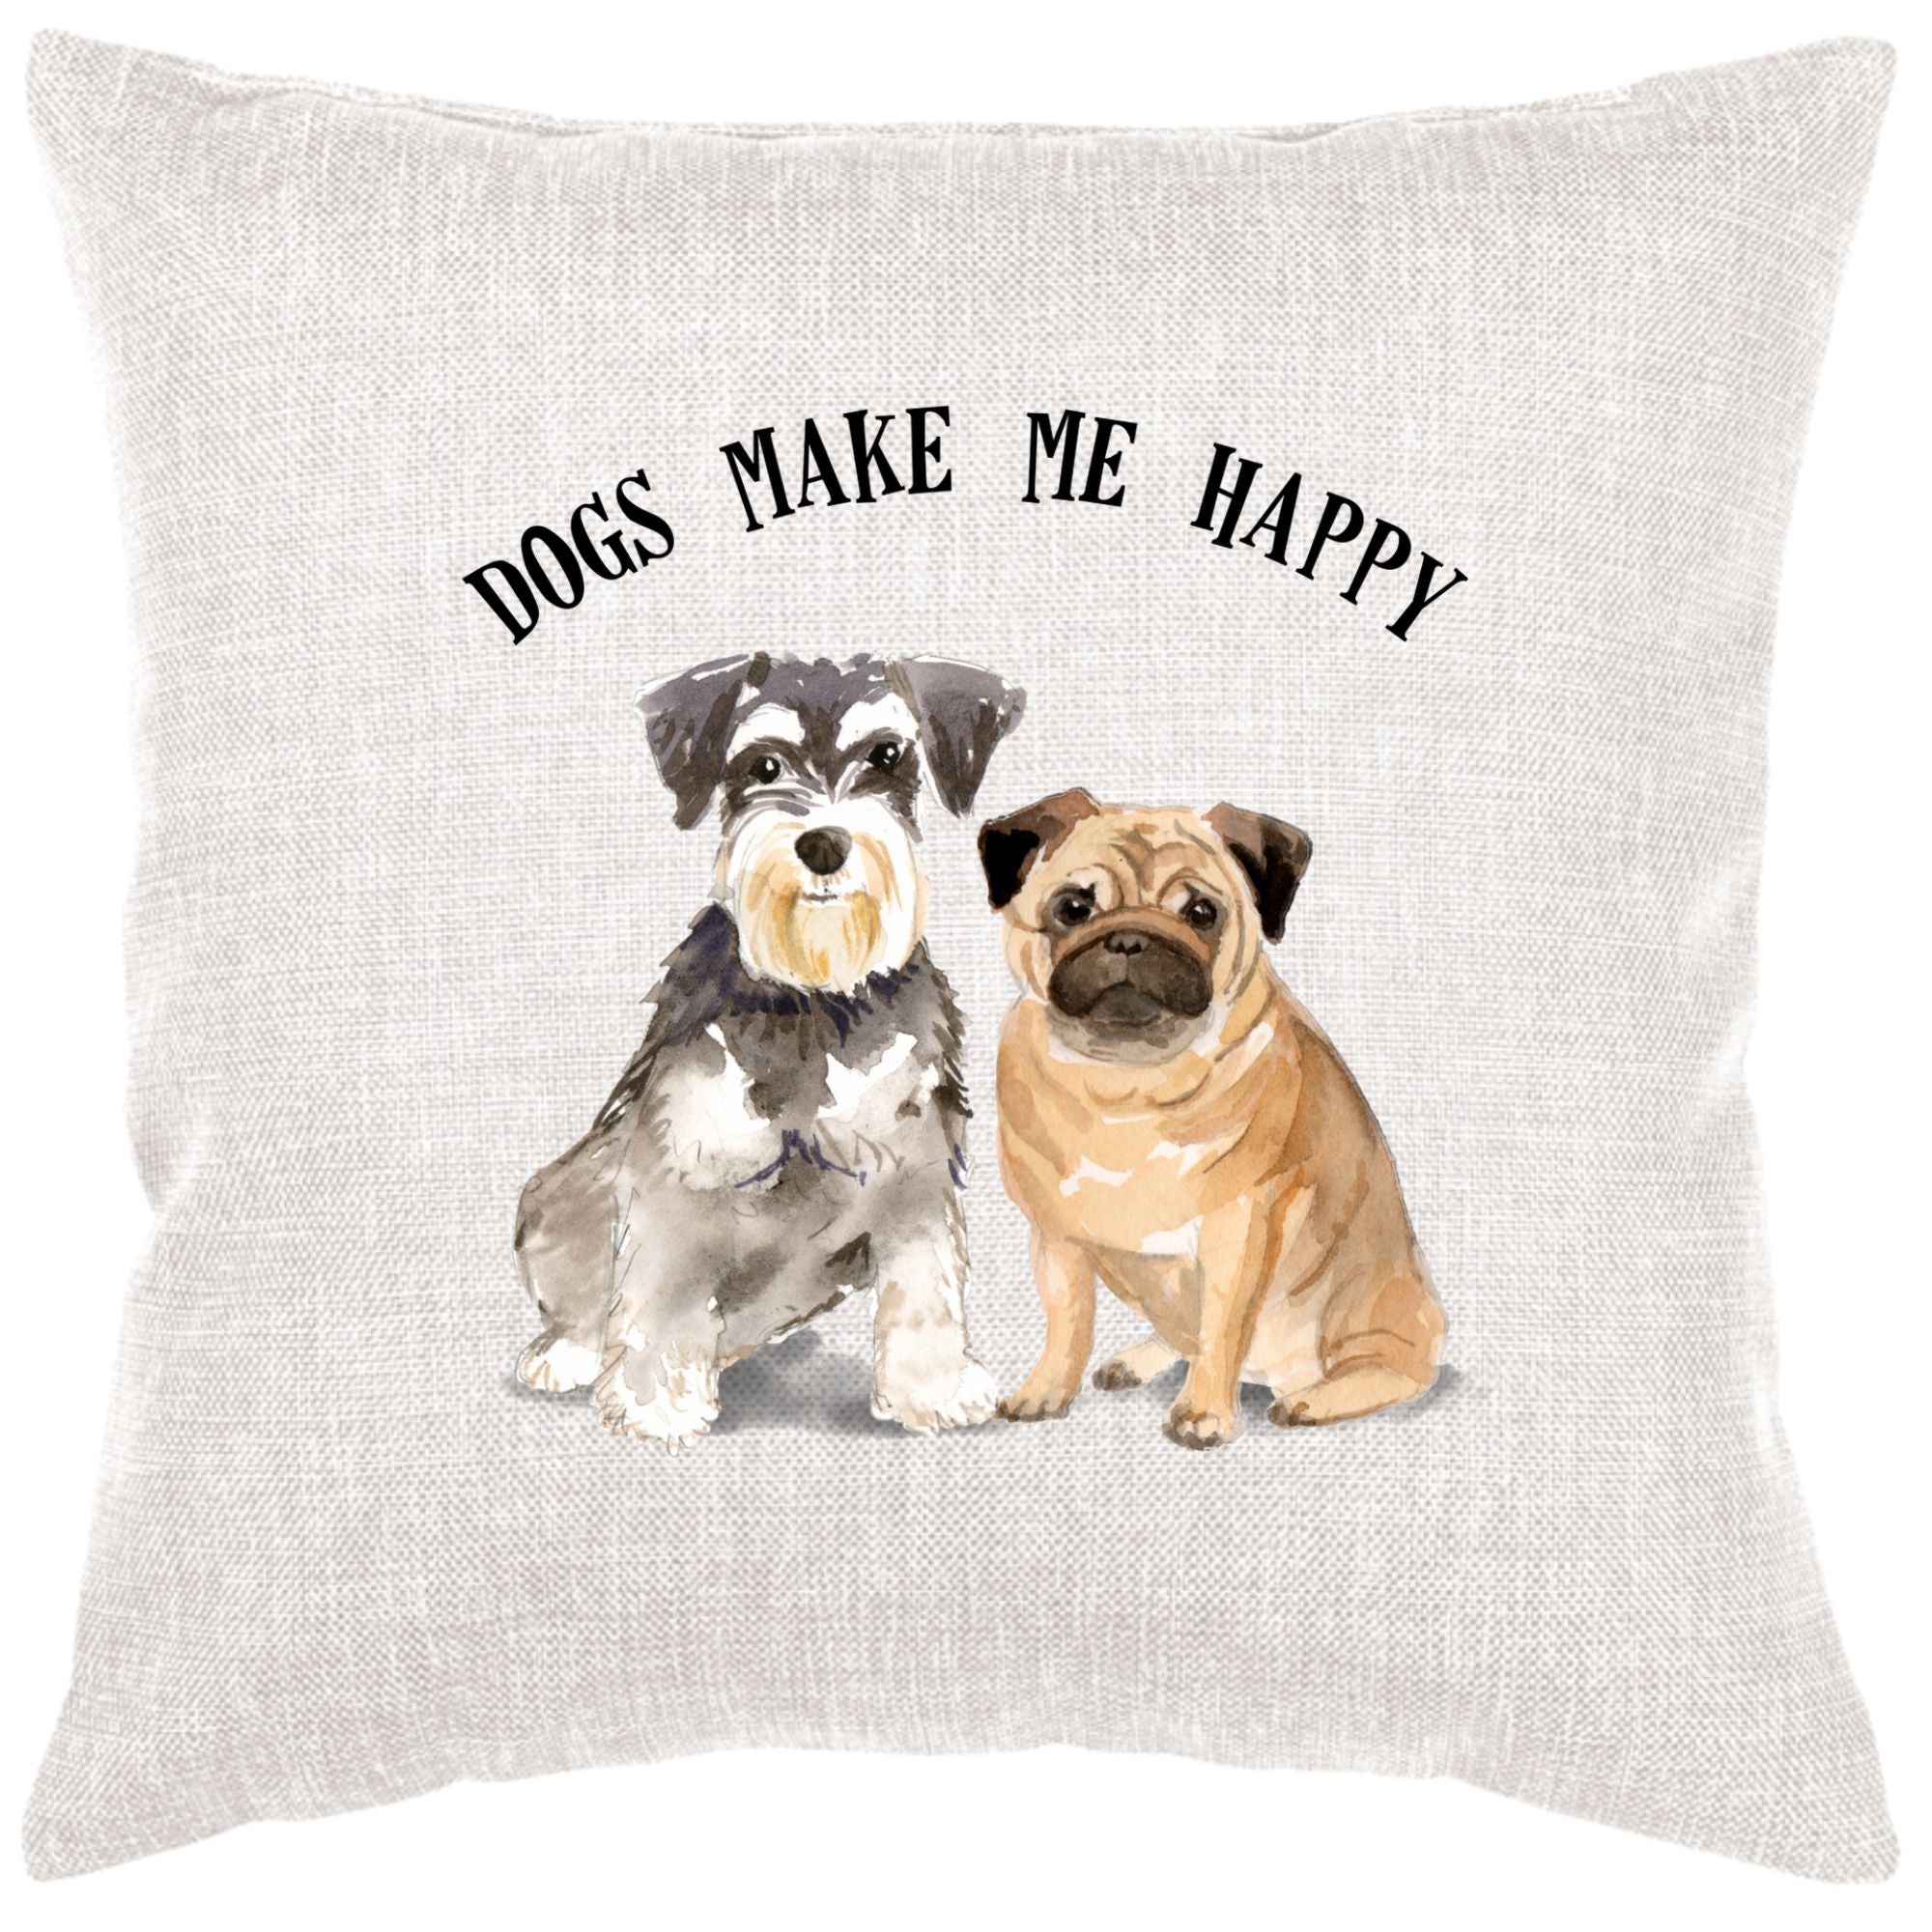 Dogs Make Me Happy Down Pillow